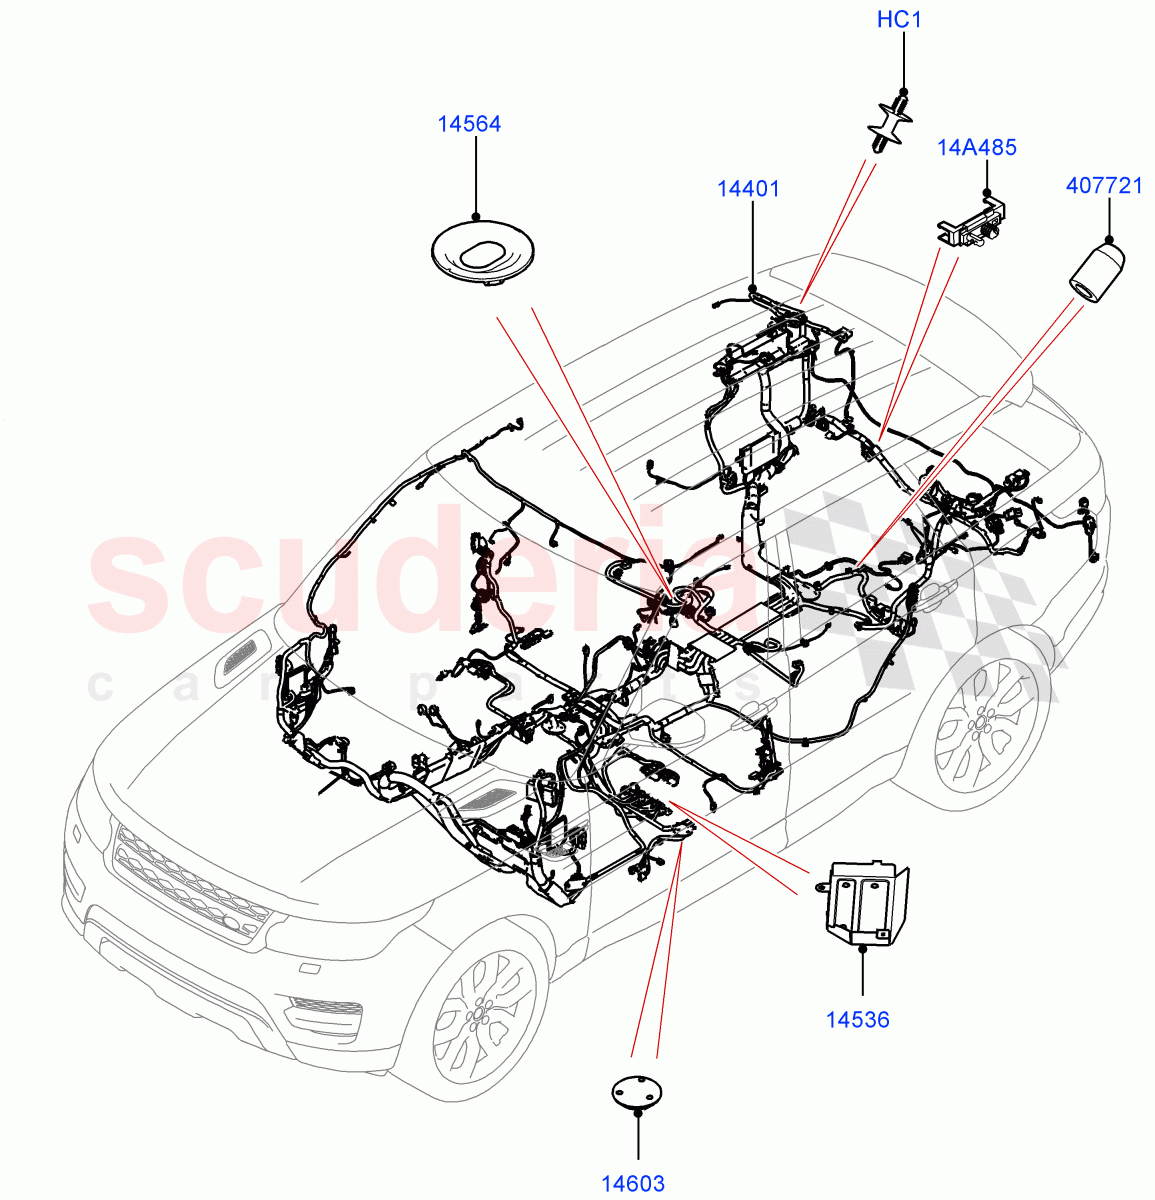 Electrical Wiring - Engine And Dash(Main Harness)((V)TOEA999999) of Land Rover Land Rover Range Rover Sport (2014+) [2.0 Turbo Petrol GTDI]